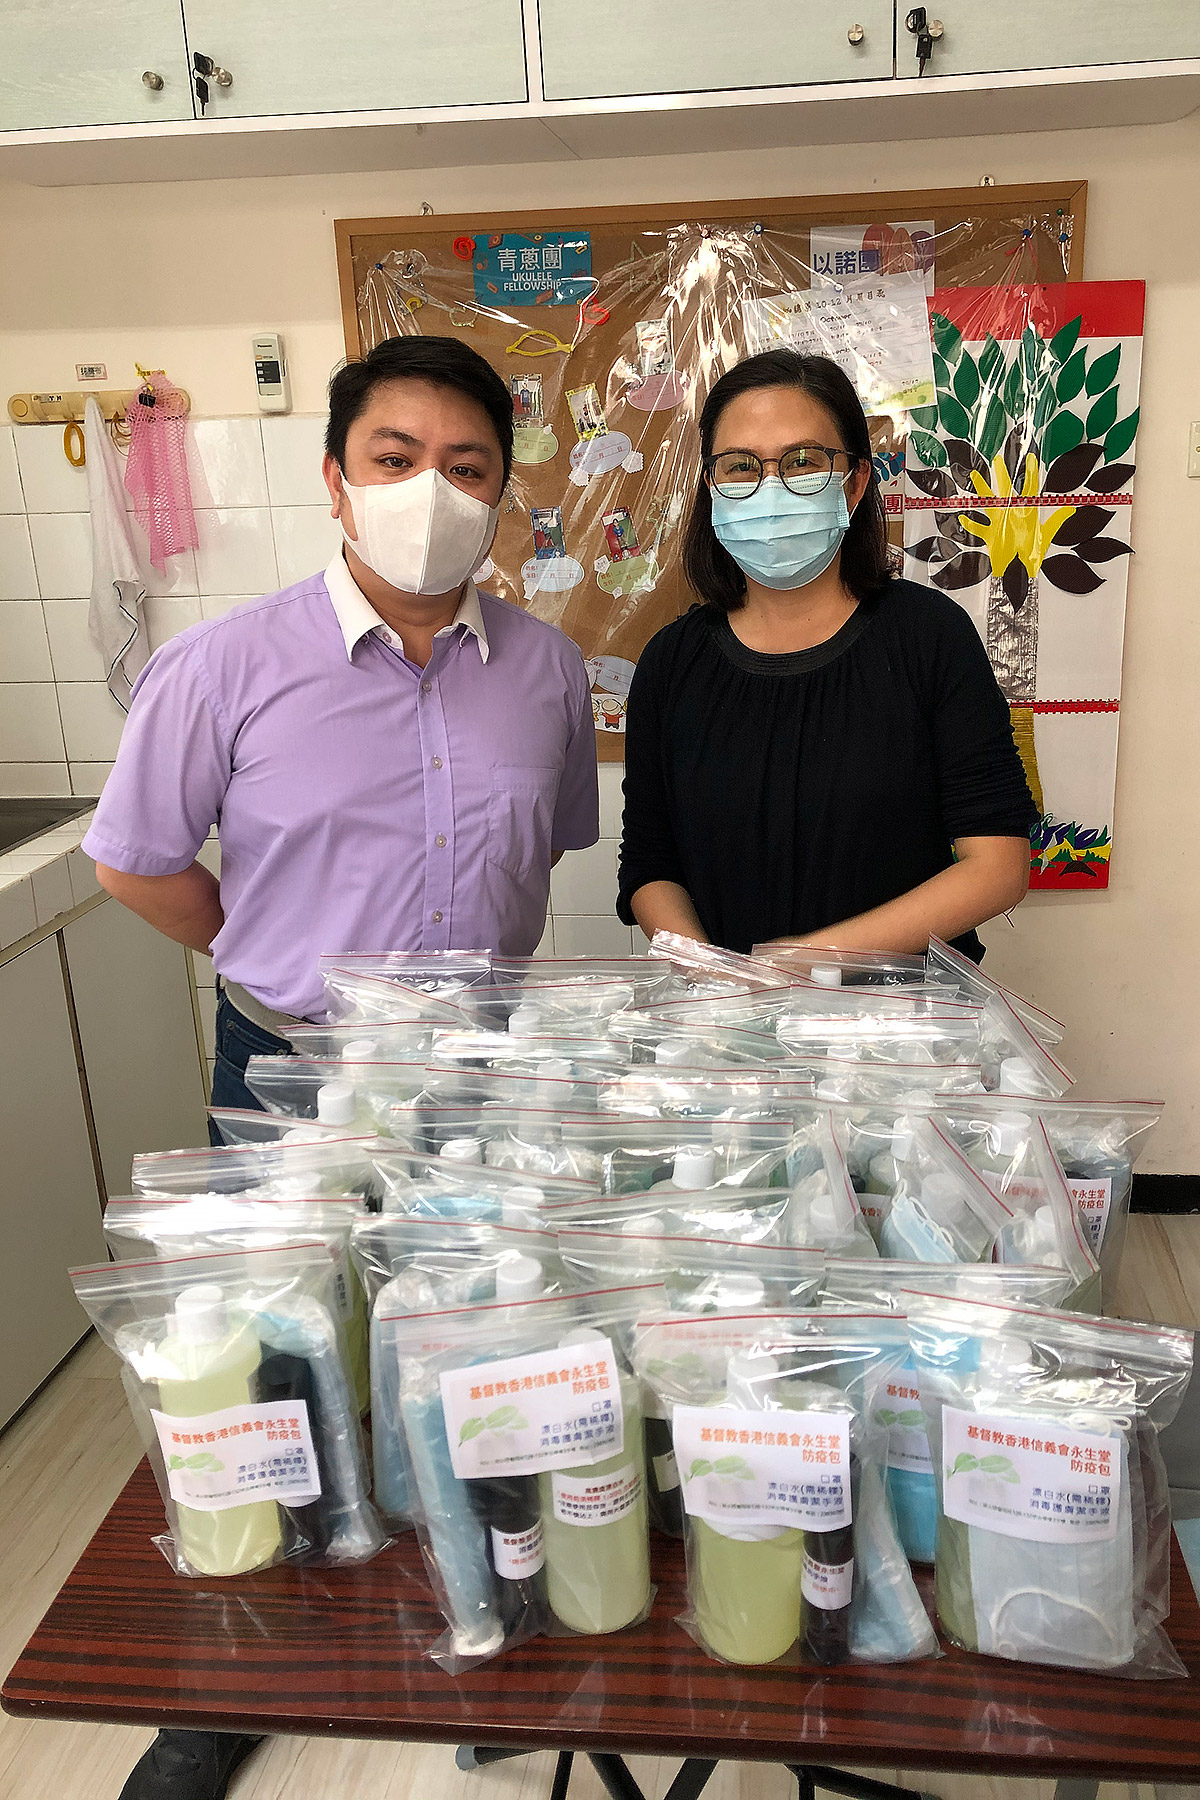 Rev. Ken Leung, pastor of the Eternal Life Lutheran Church, and a volunteer with supplies of hand sanitizer, masks and other hygiene products ready for distribution